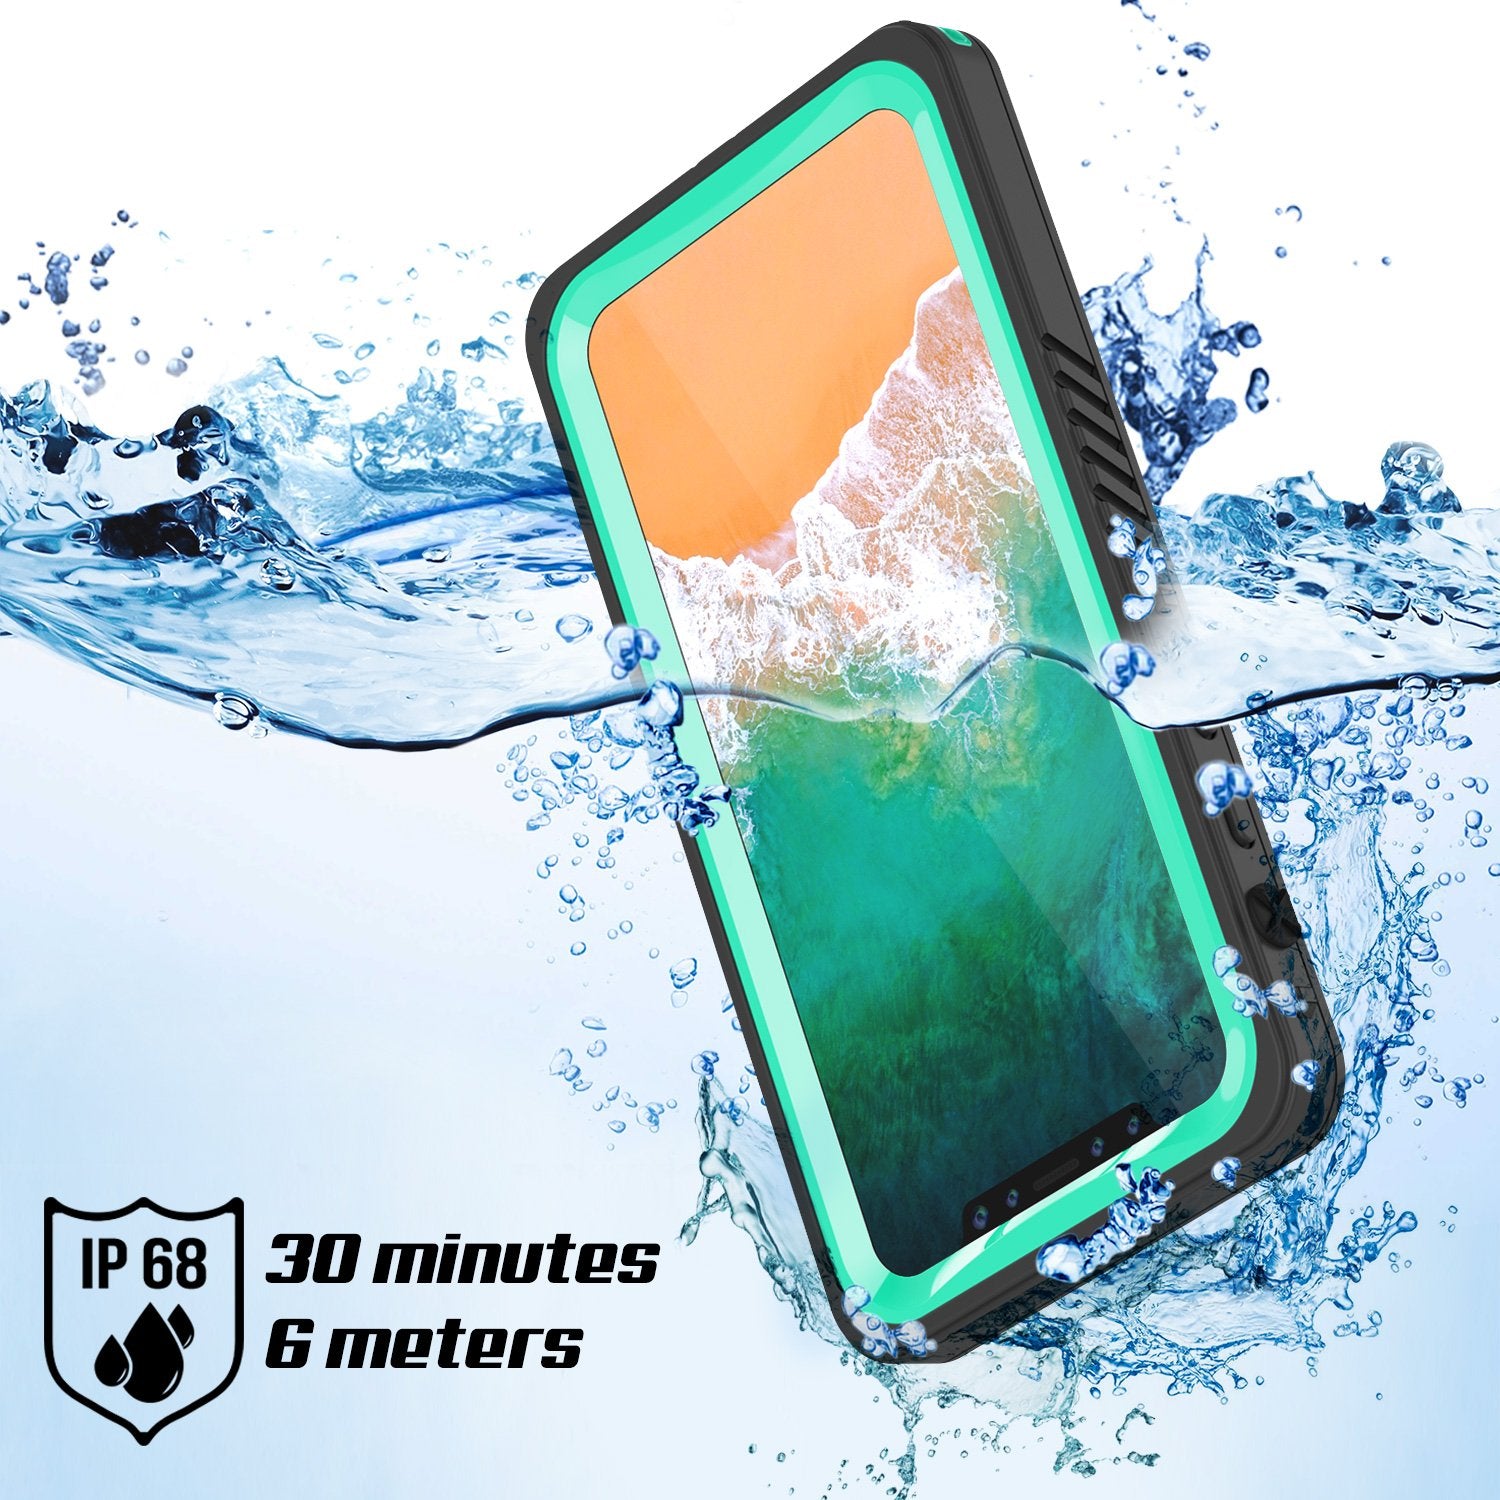 iPhone X Case, Punkcase [Extreme Series] [Slim Fit] [IP68 Certified] [Teal] - PunkCase NZ